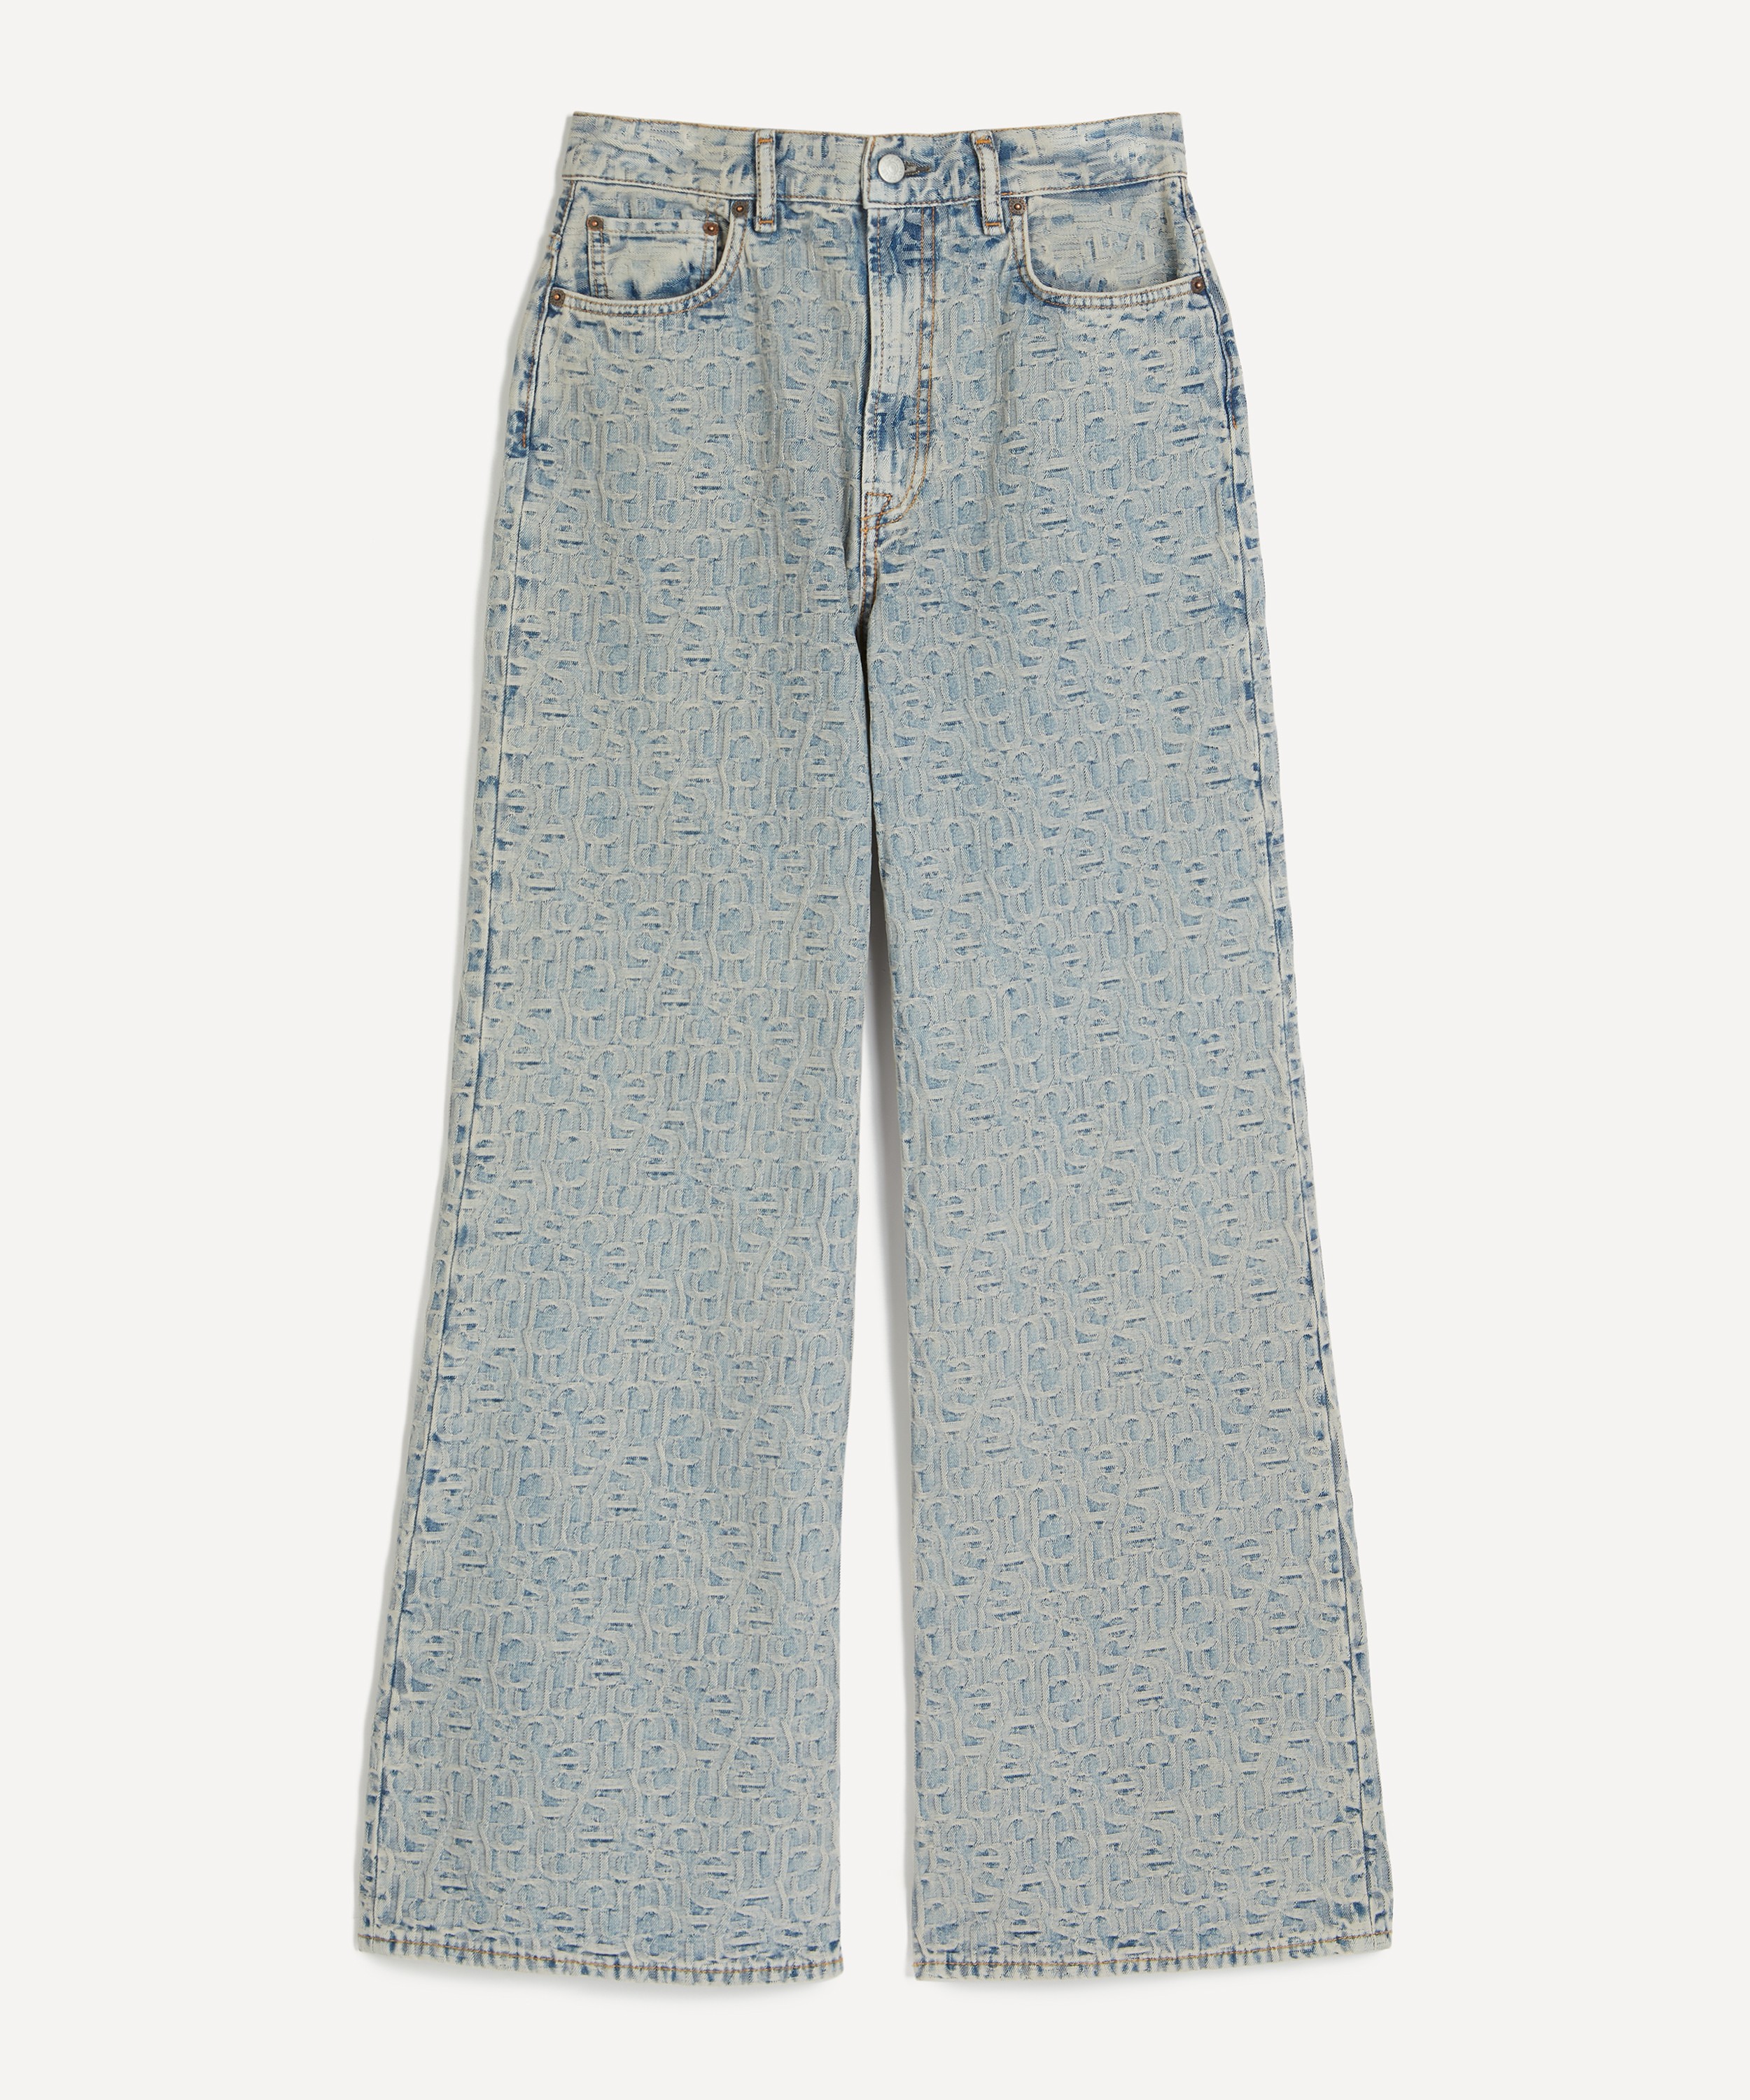 Acne Studios - 2002 Monogram Relaxed Fit Jeans